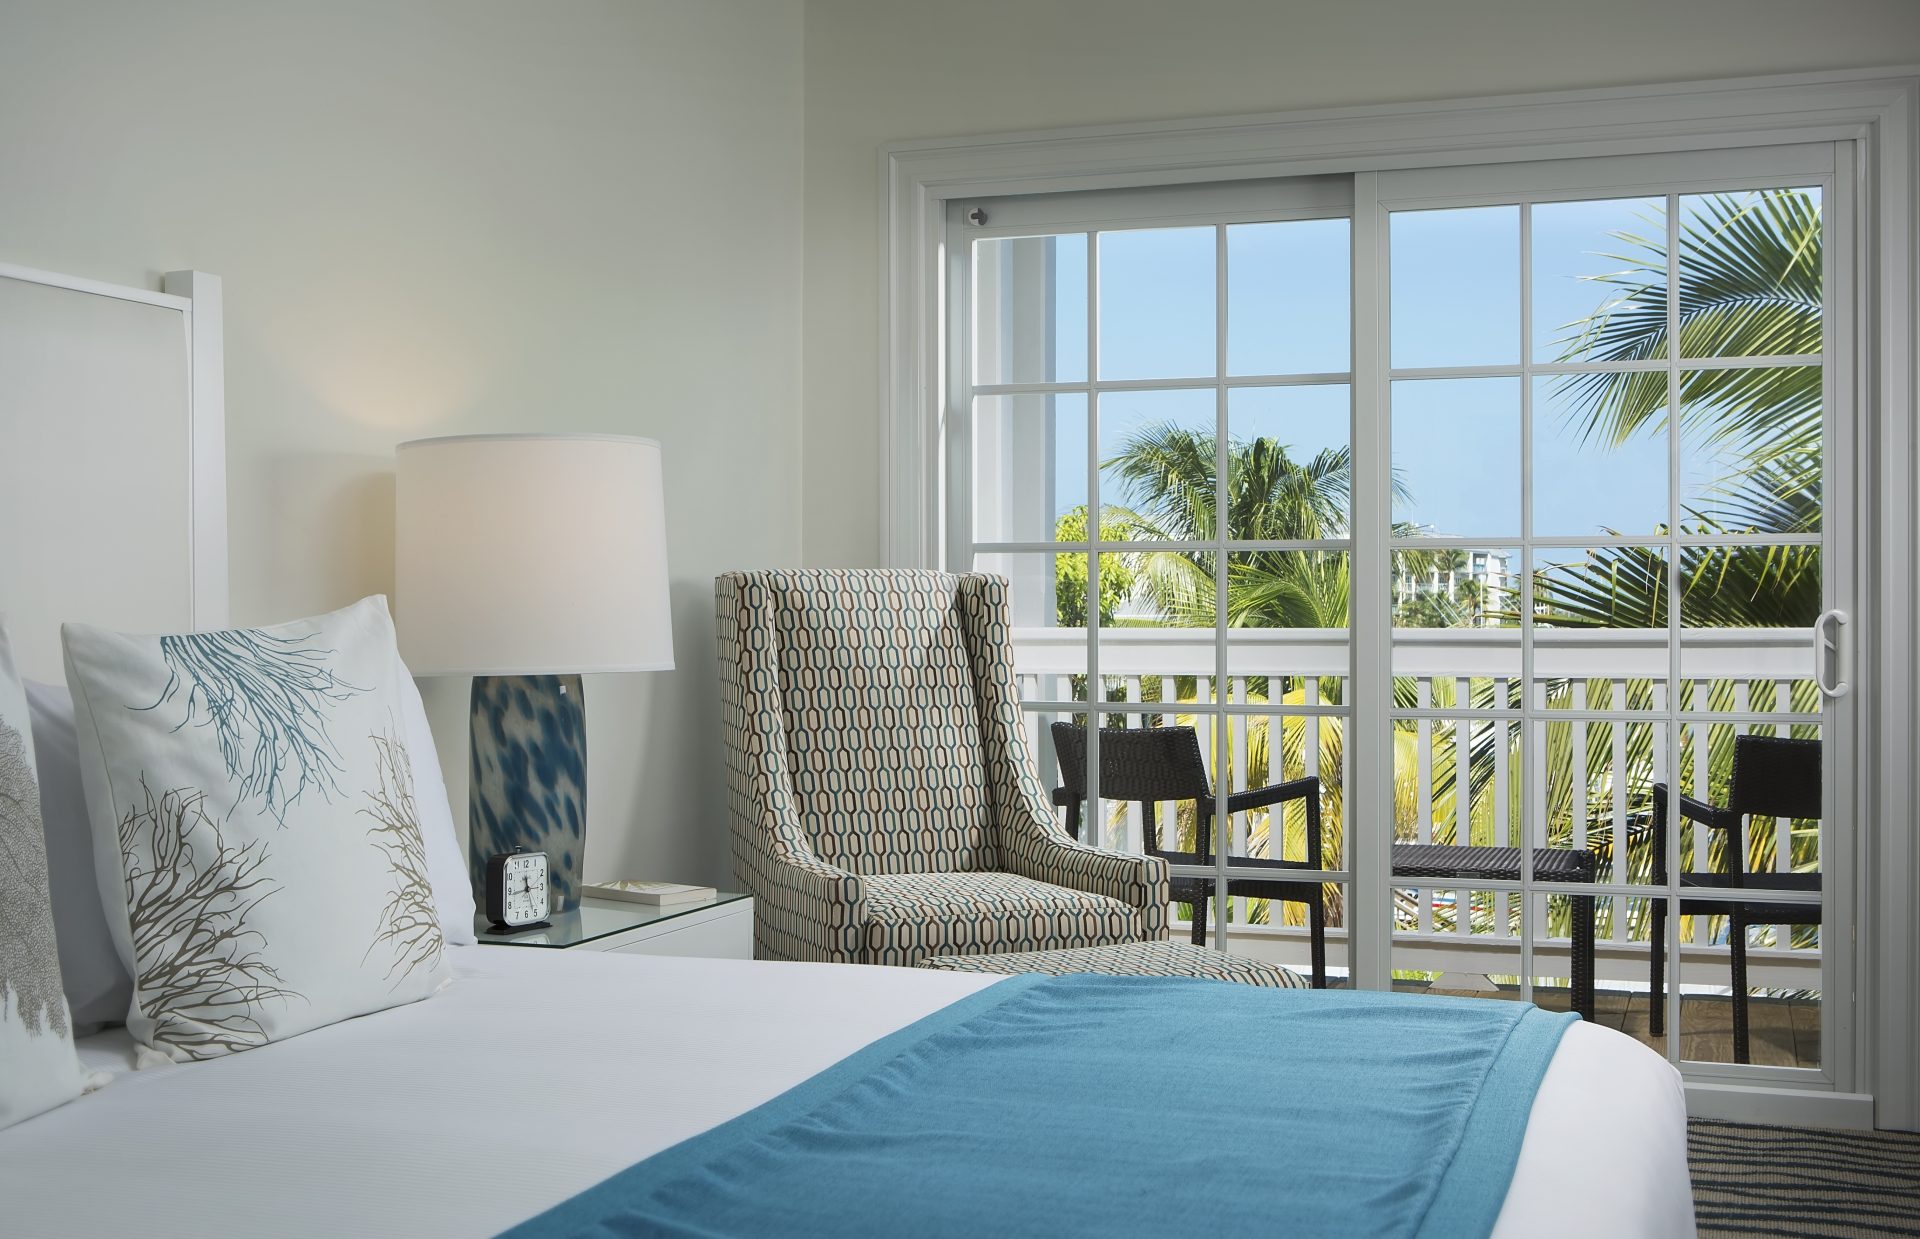 Photo of guest room at The Marker Waterfront Resort in Key West, Florida